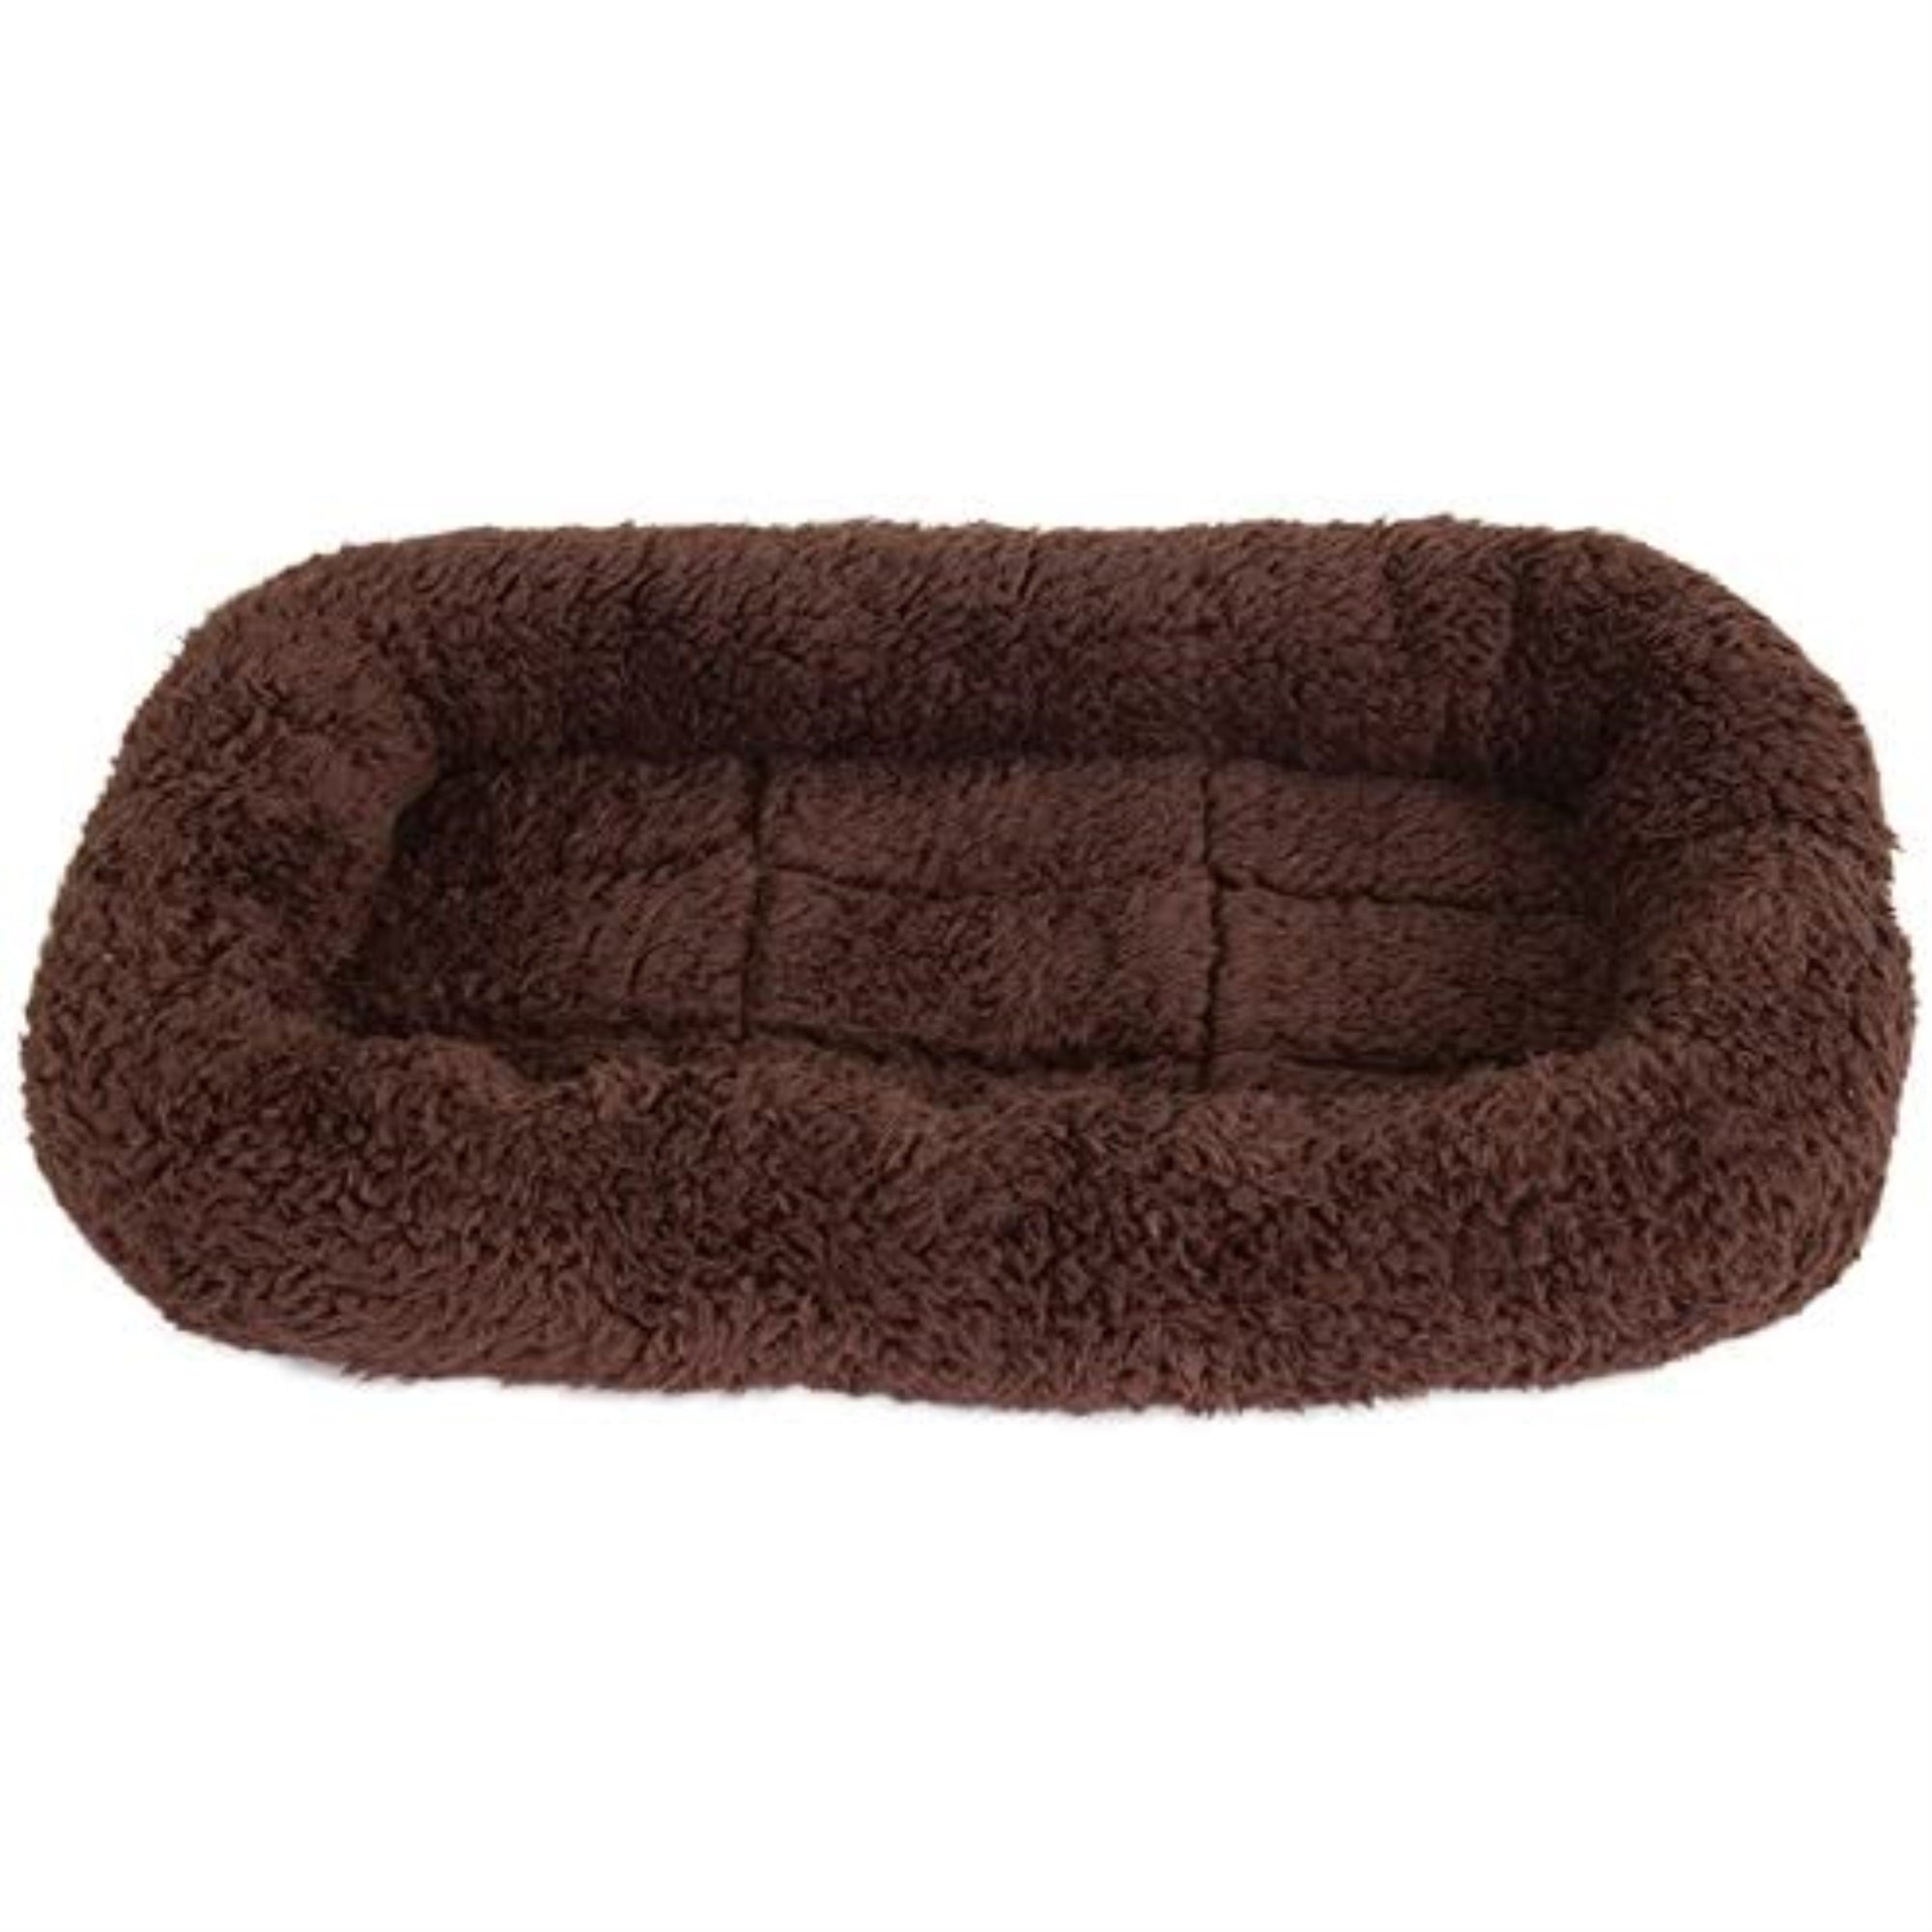 SnooZZy Cozy Bumper Bed- 1000-Chocolate